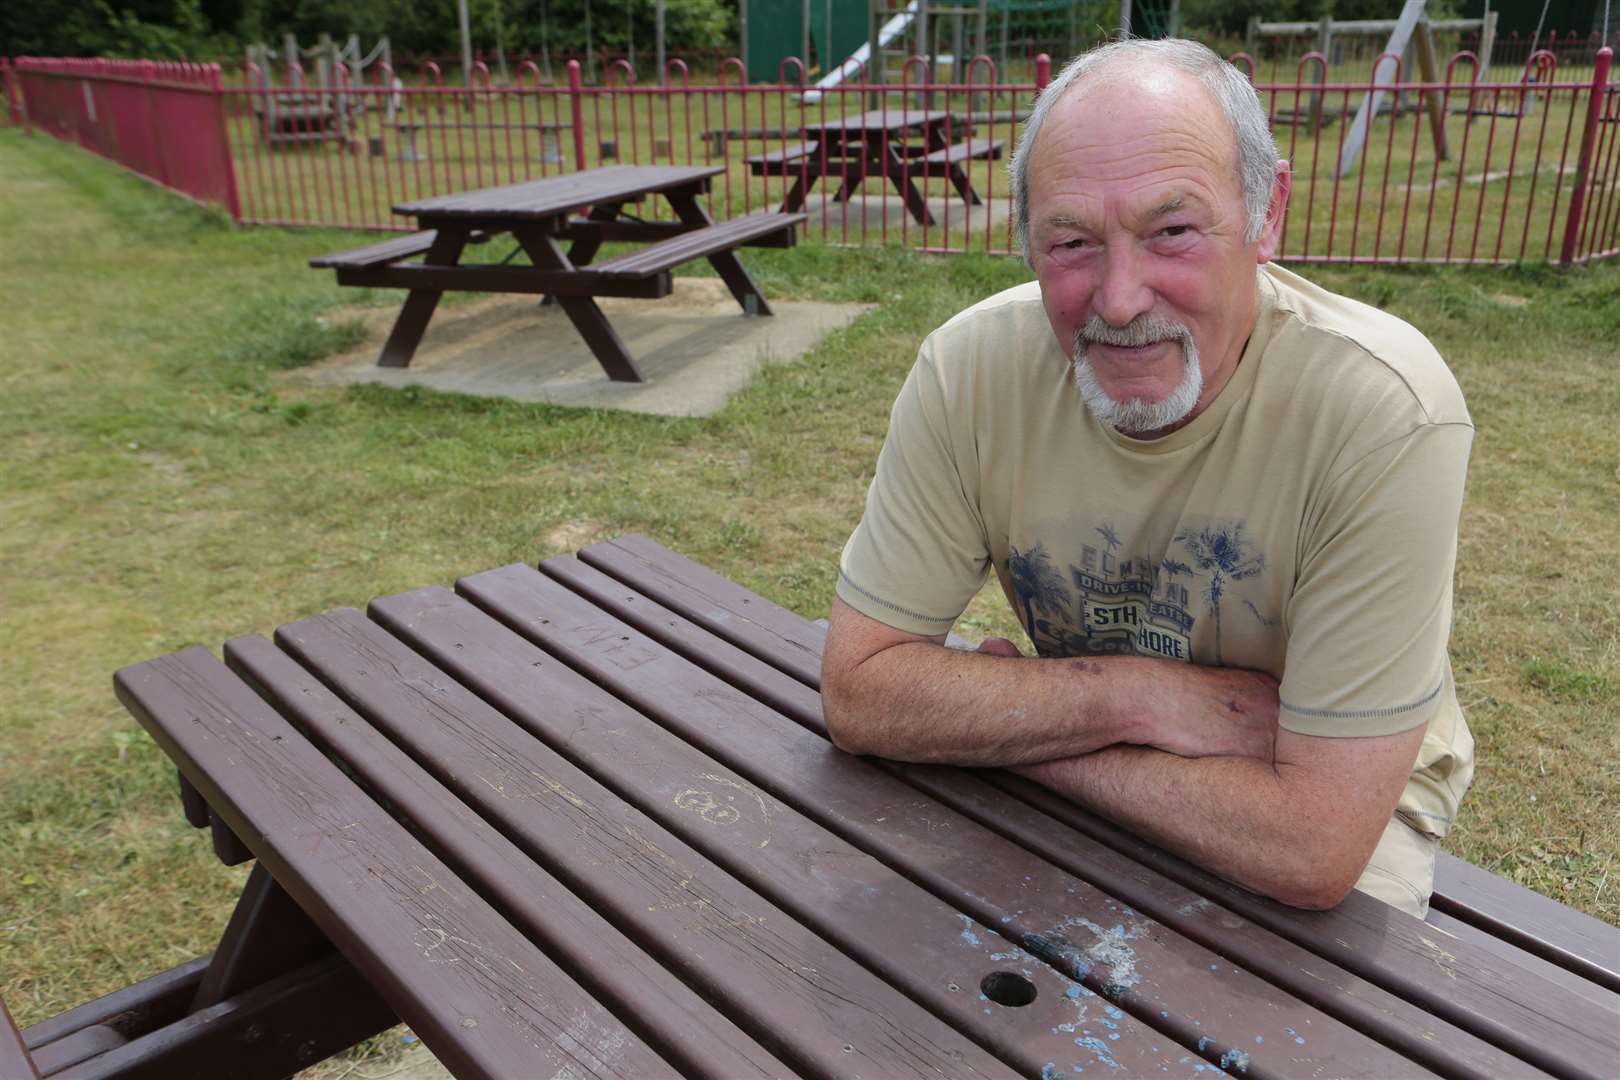 Benches have been damaged in the vandalism